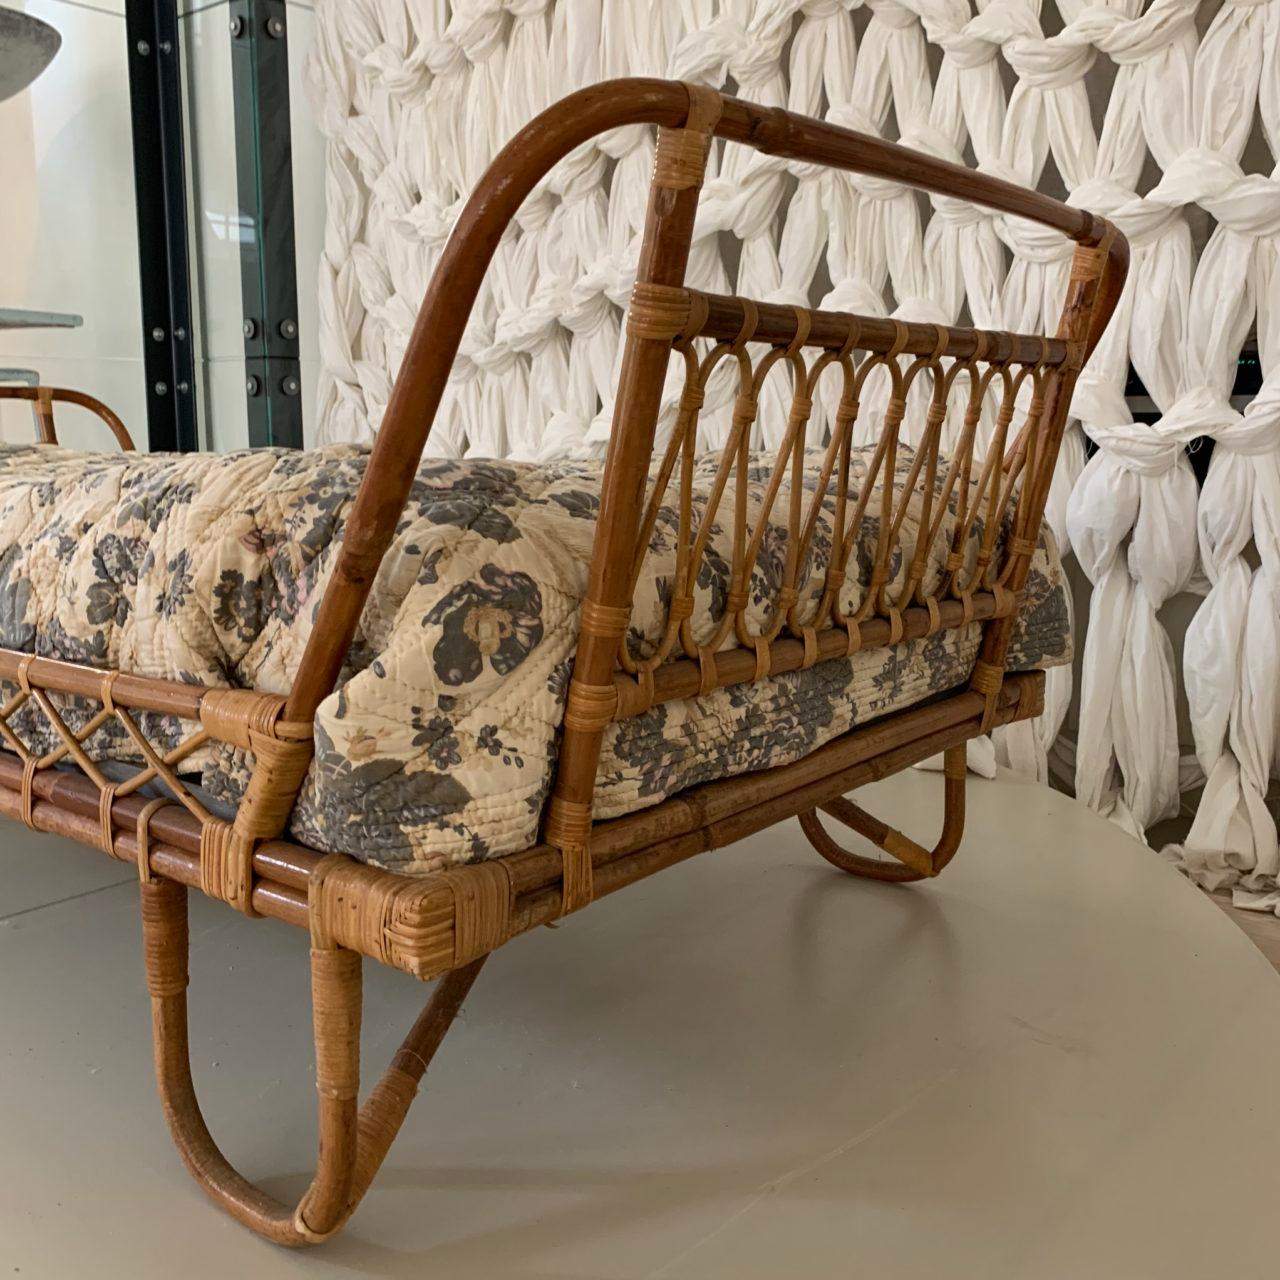 20th Century Pair of Rattan Midcentury (1940s)  Daybeds or Beds